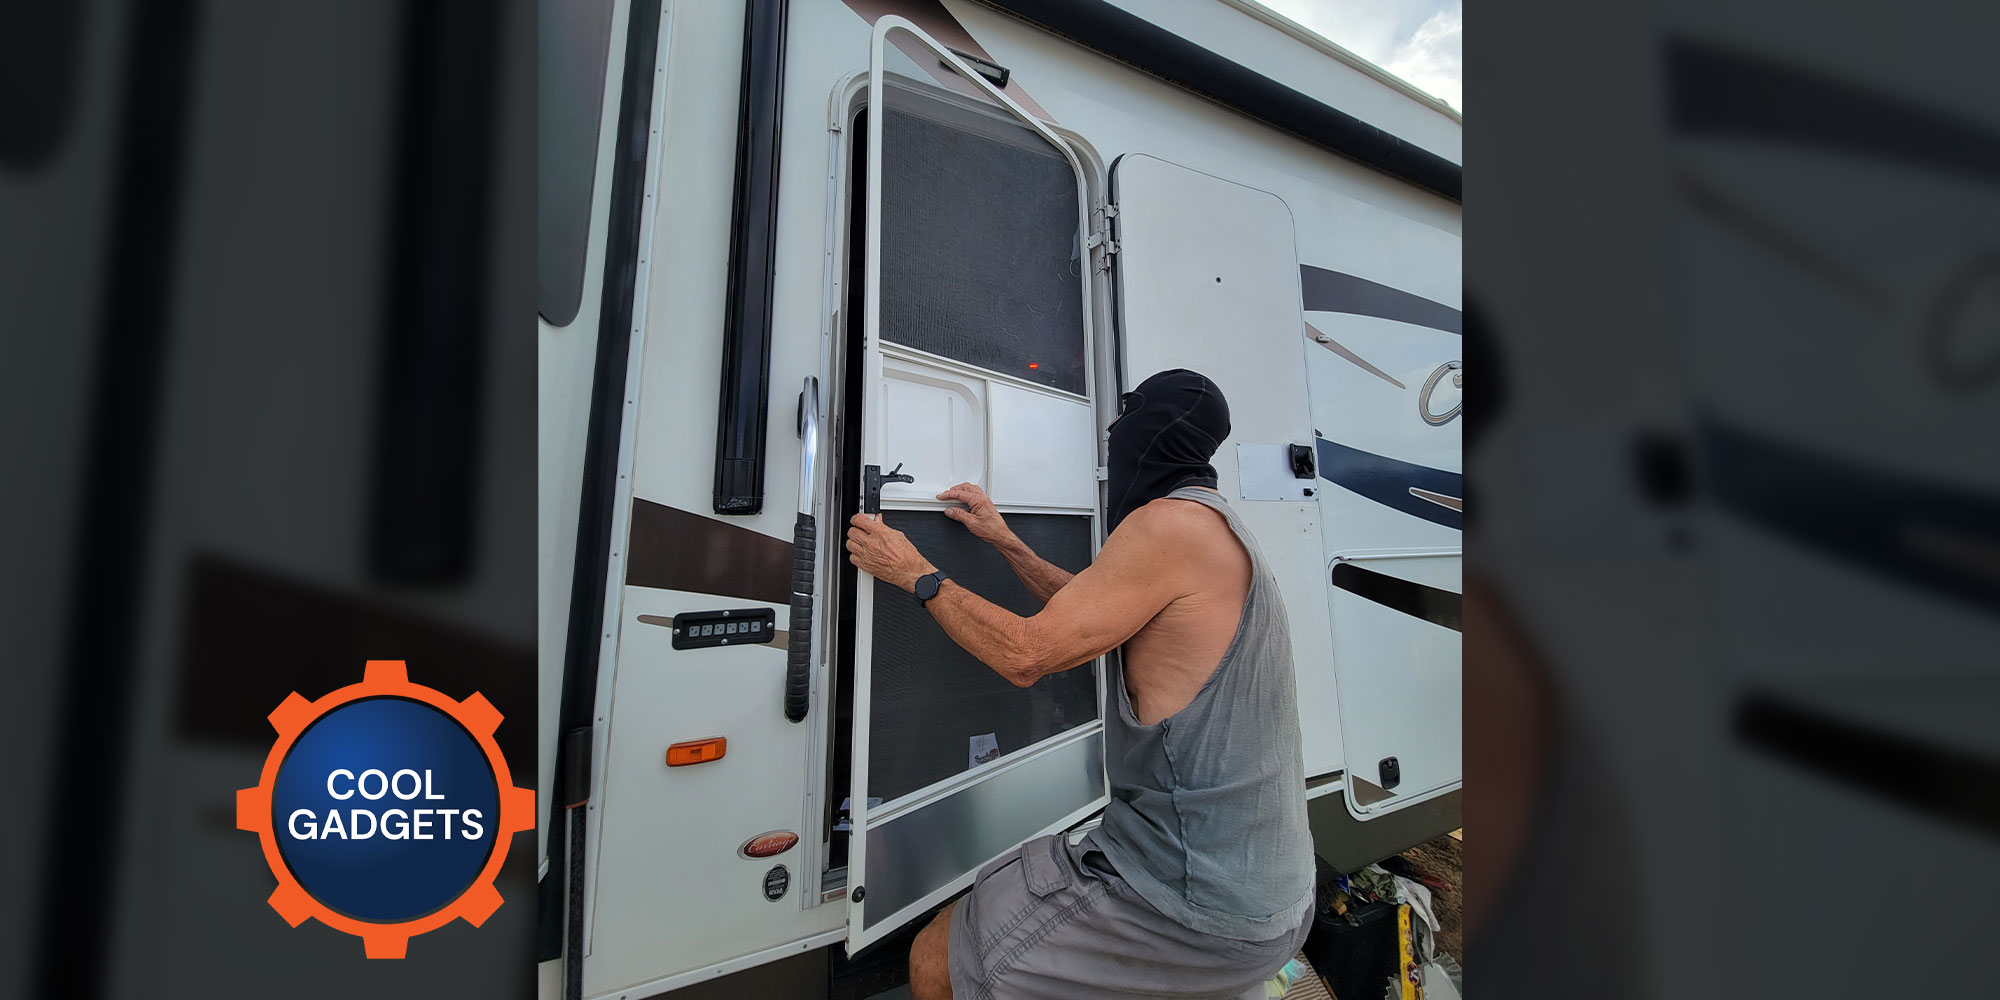 a man wearing a ski mask opens the screen door on an RV